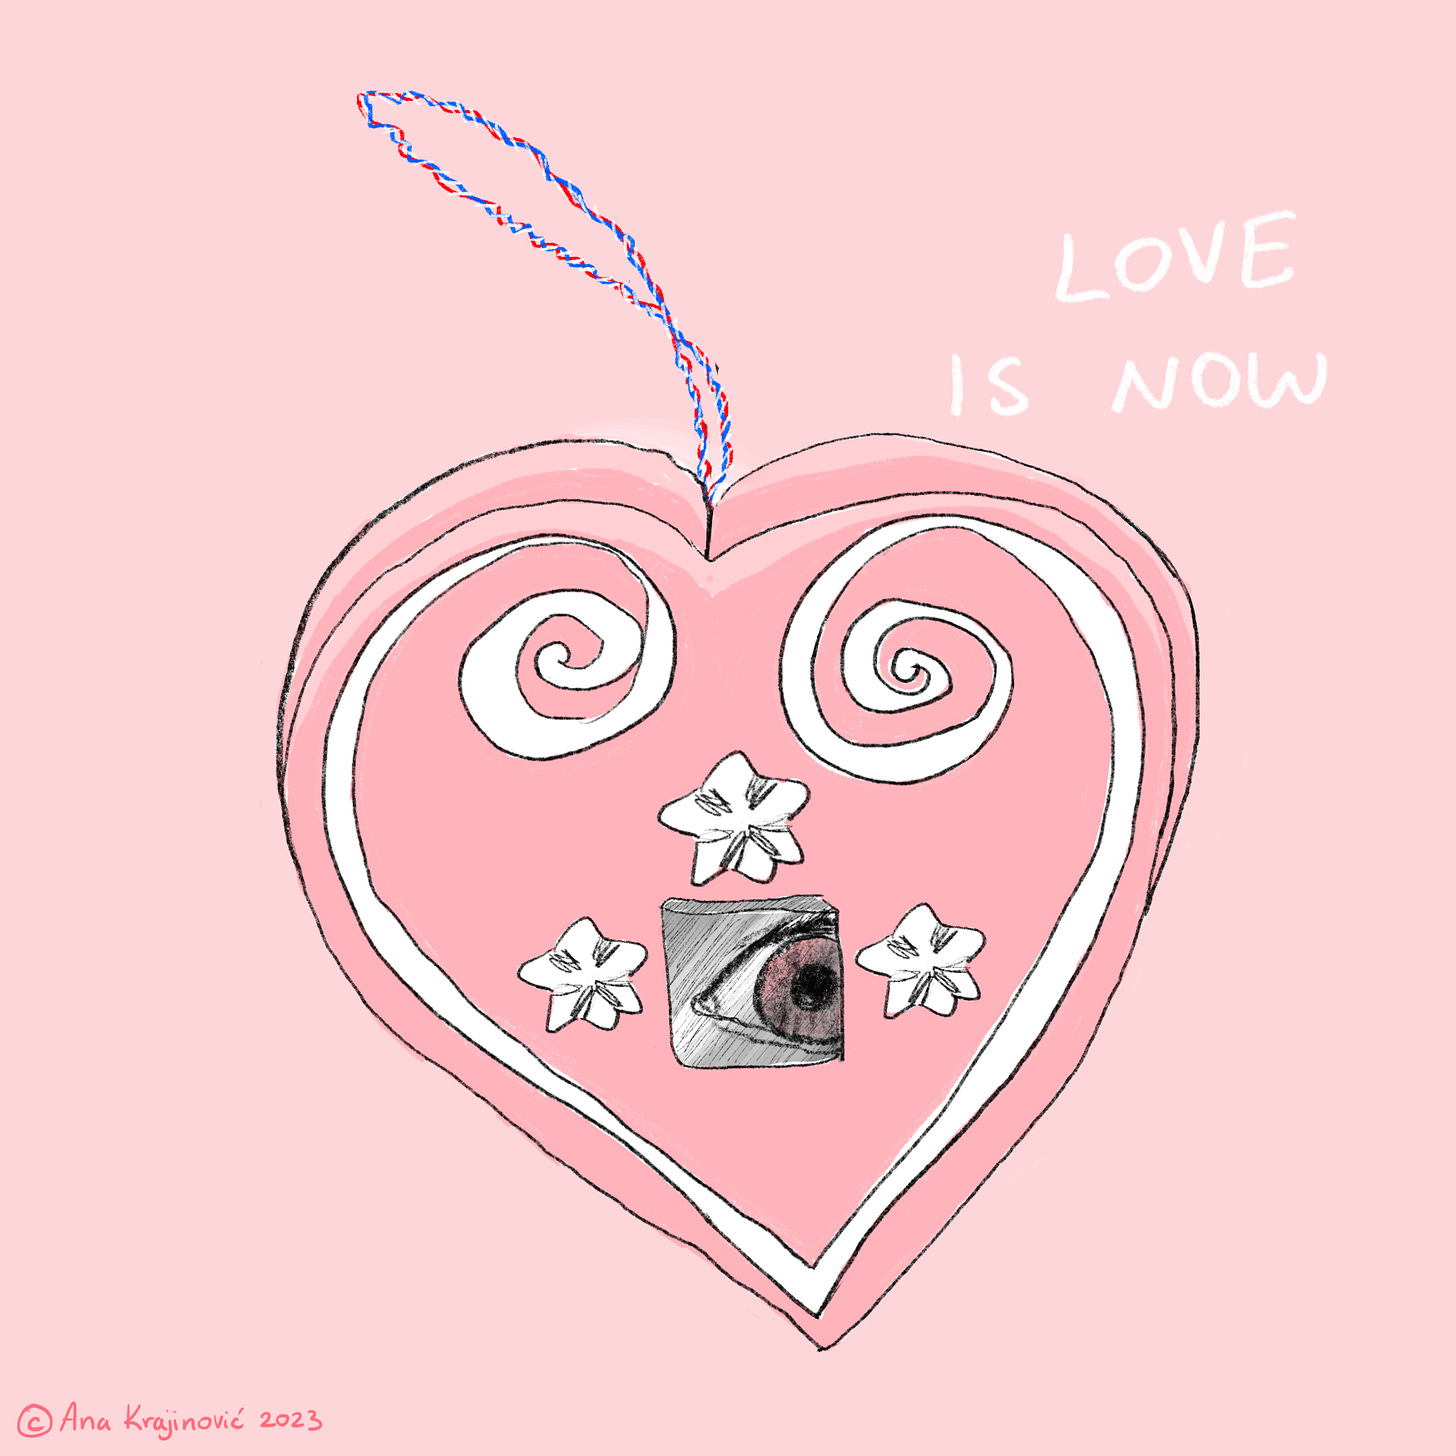 "Love is now" on the pink background with a decorated heart.